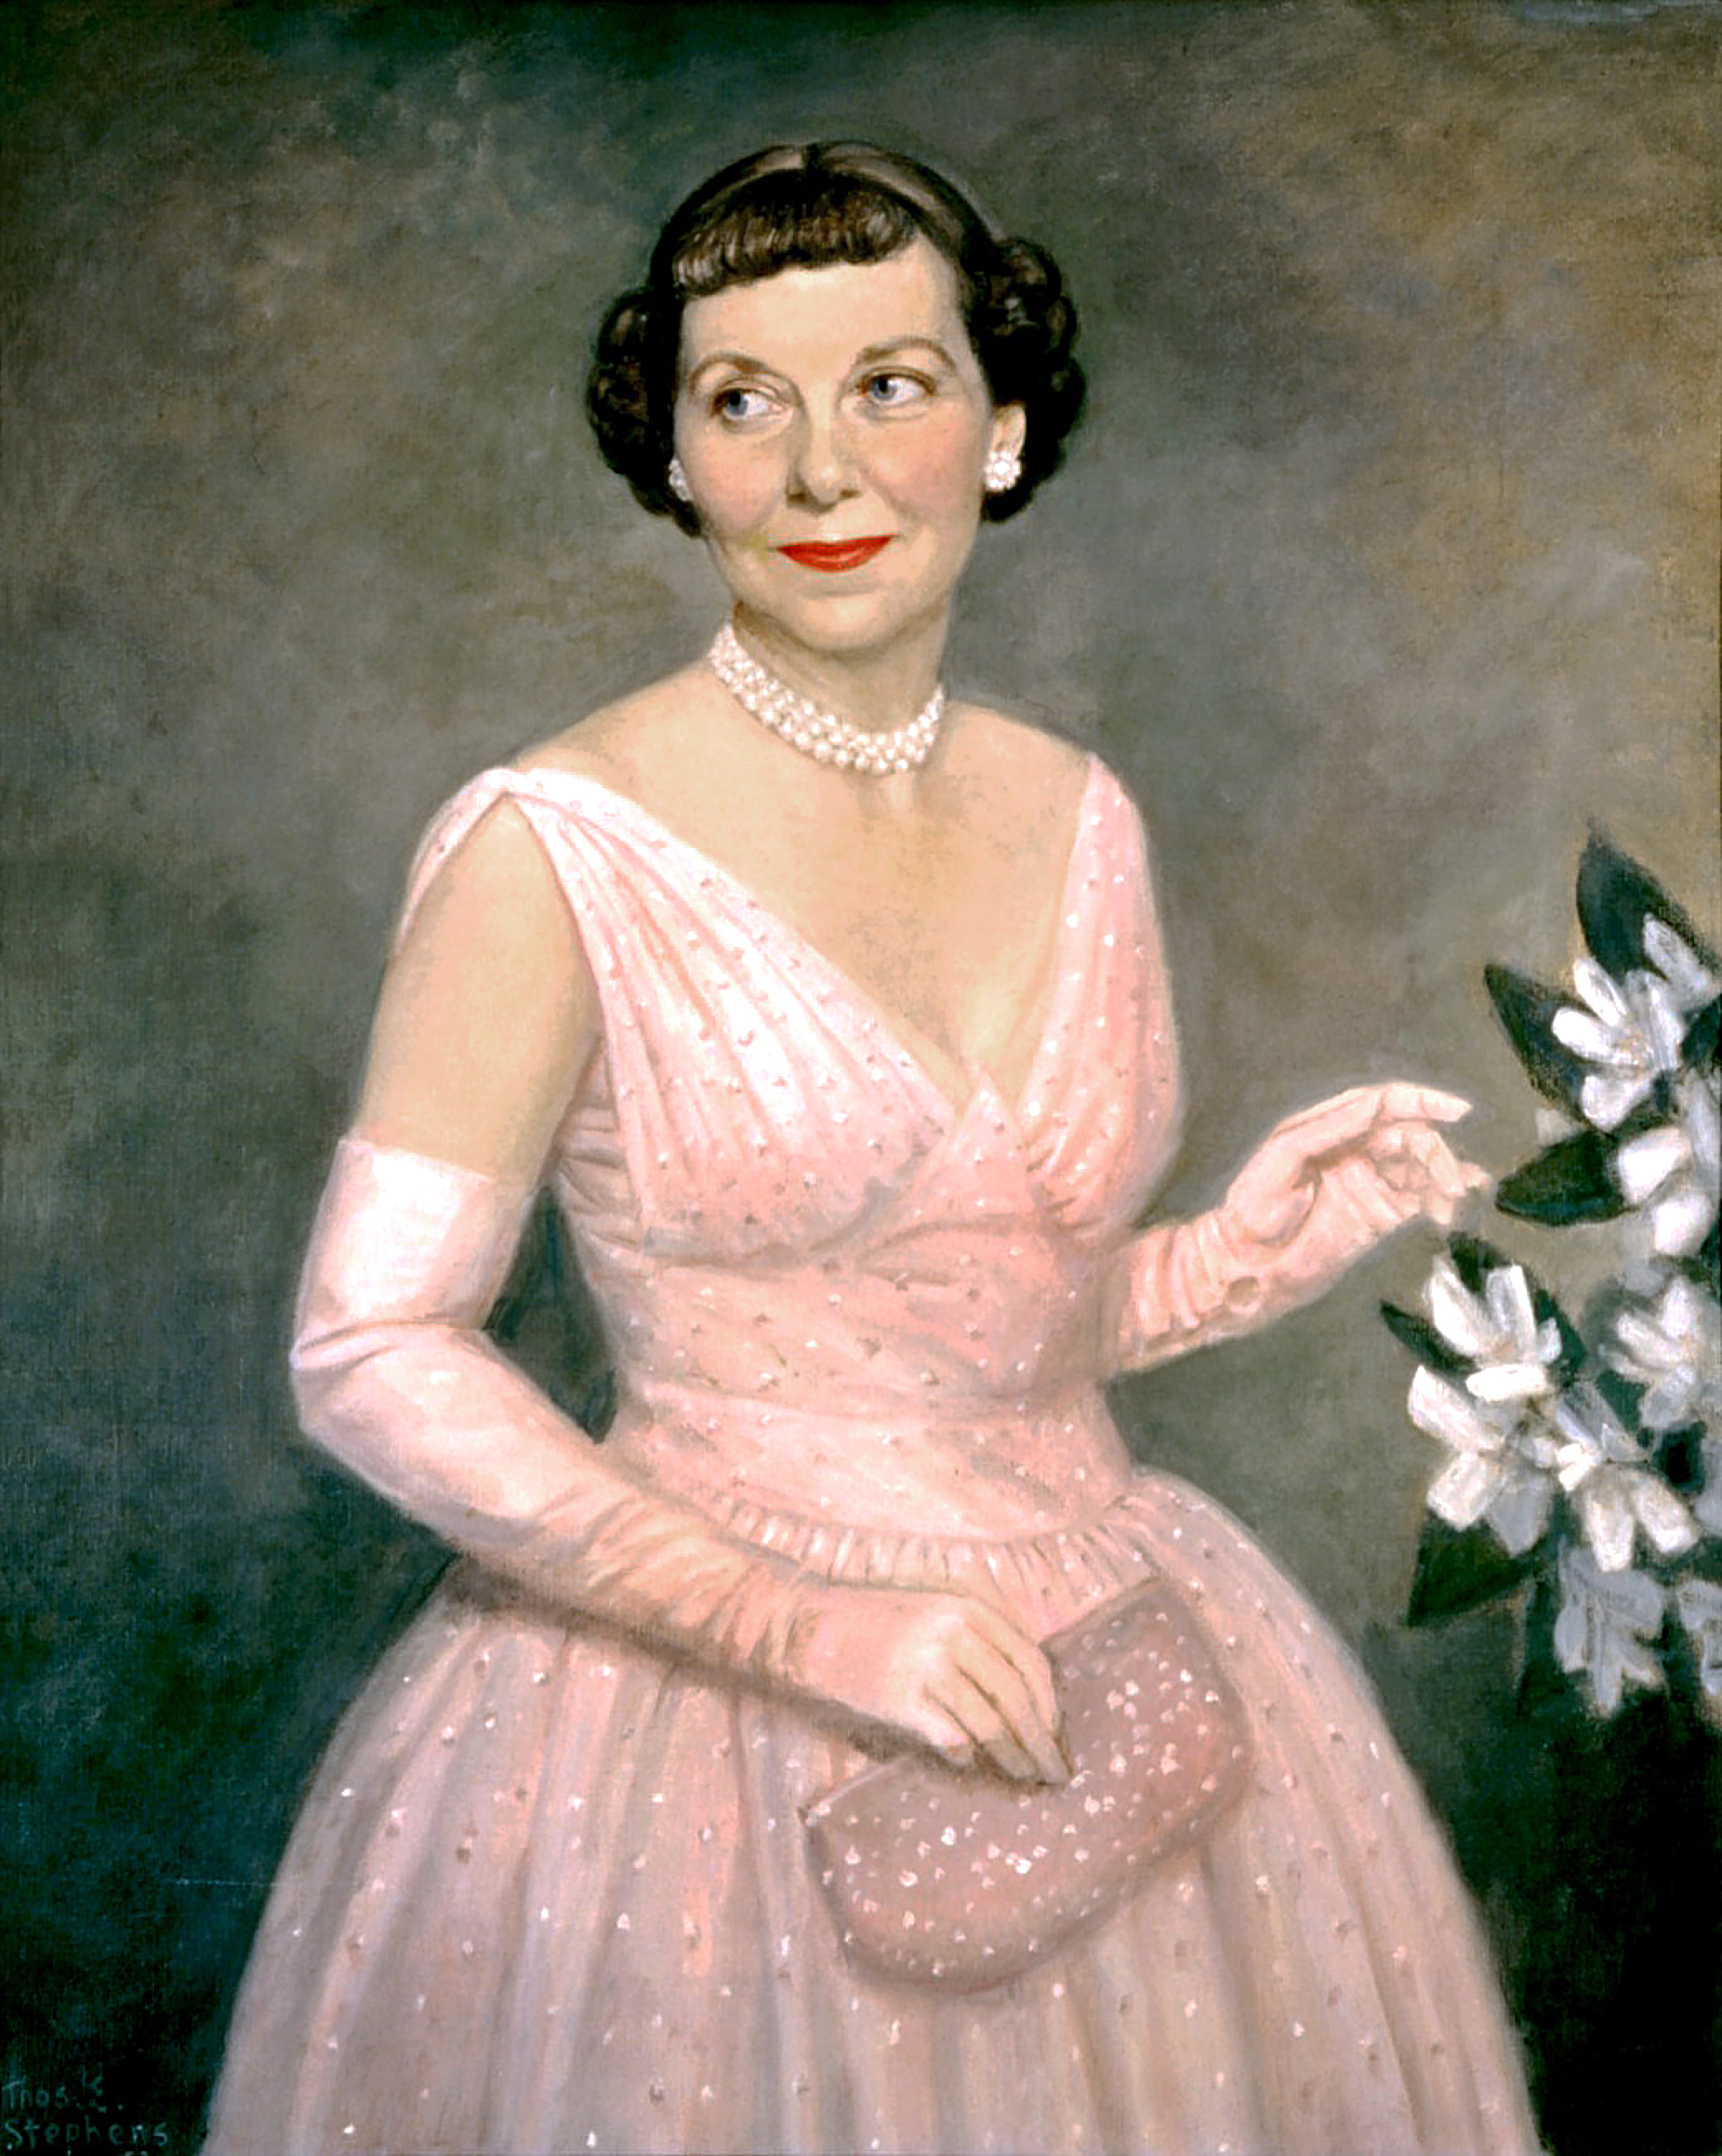 Mamie Geneva Doud Eisenhower painted by Thomas Edgar Stephens in a White House portrait. Image: White House Historical Association / Wikimedia Commons